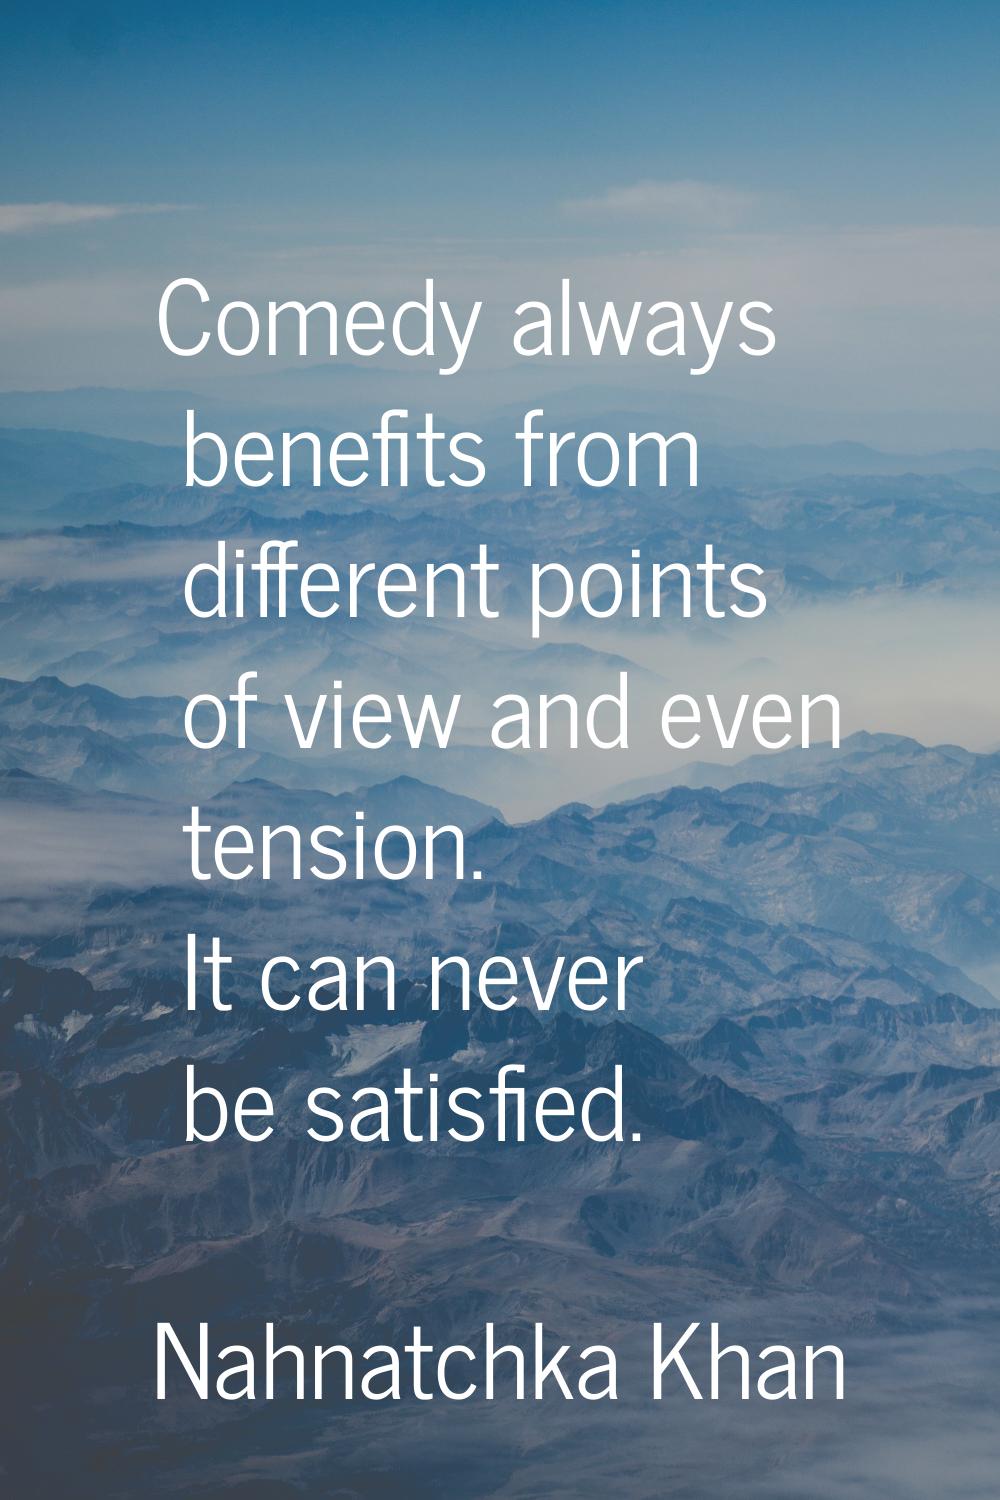 Comedy always benefits from different points of view and even tension. It can never be satisfied.